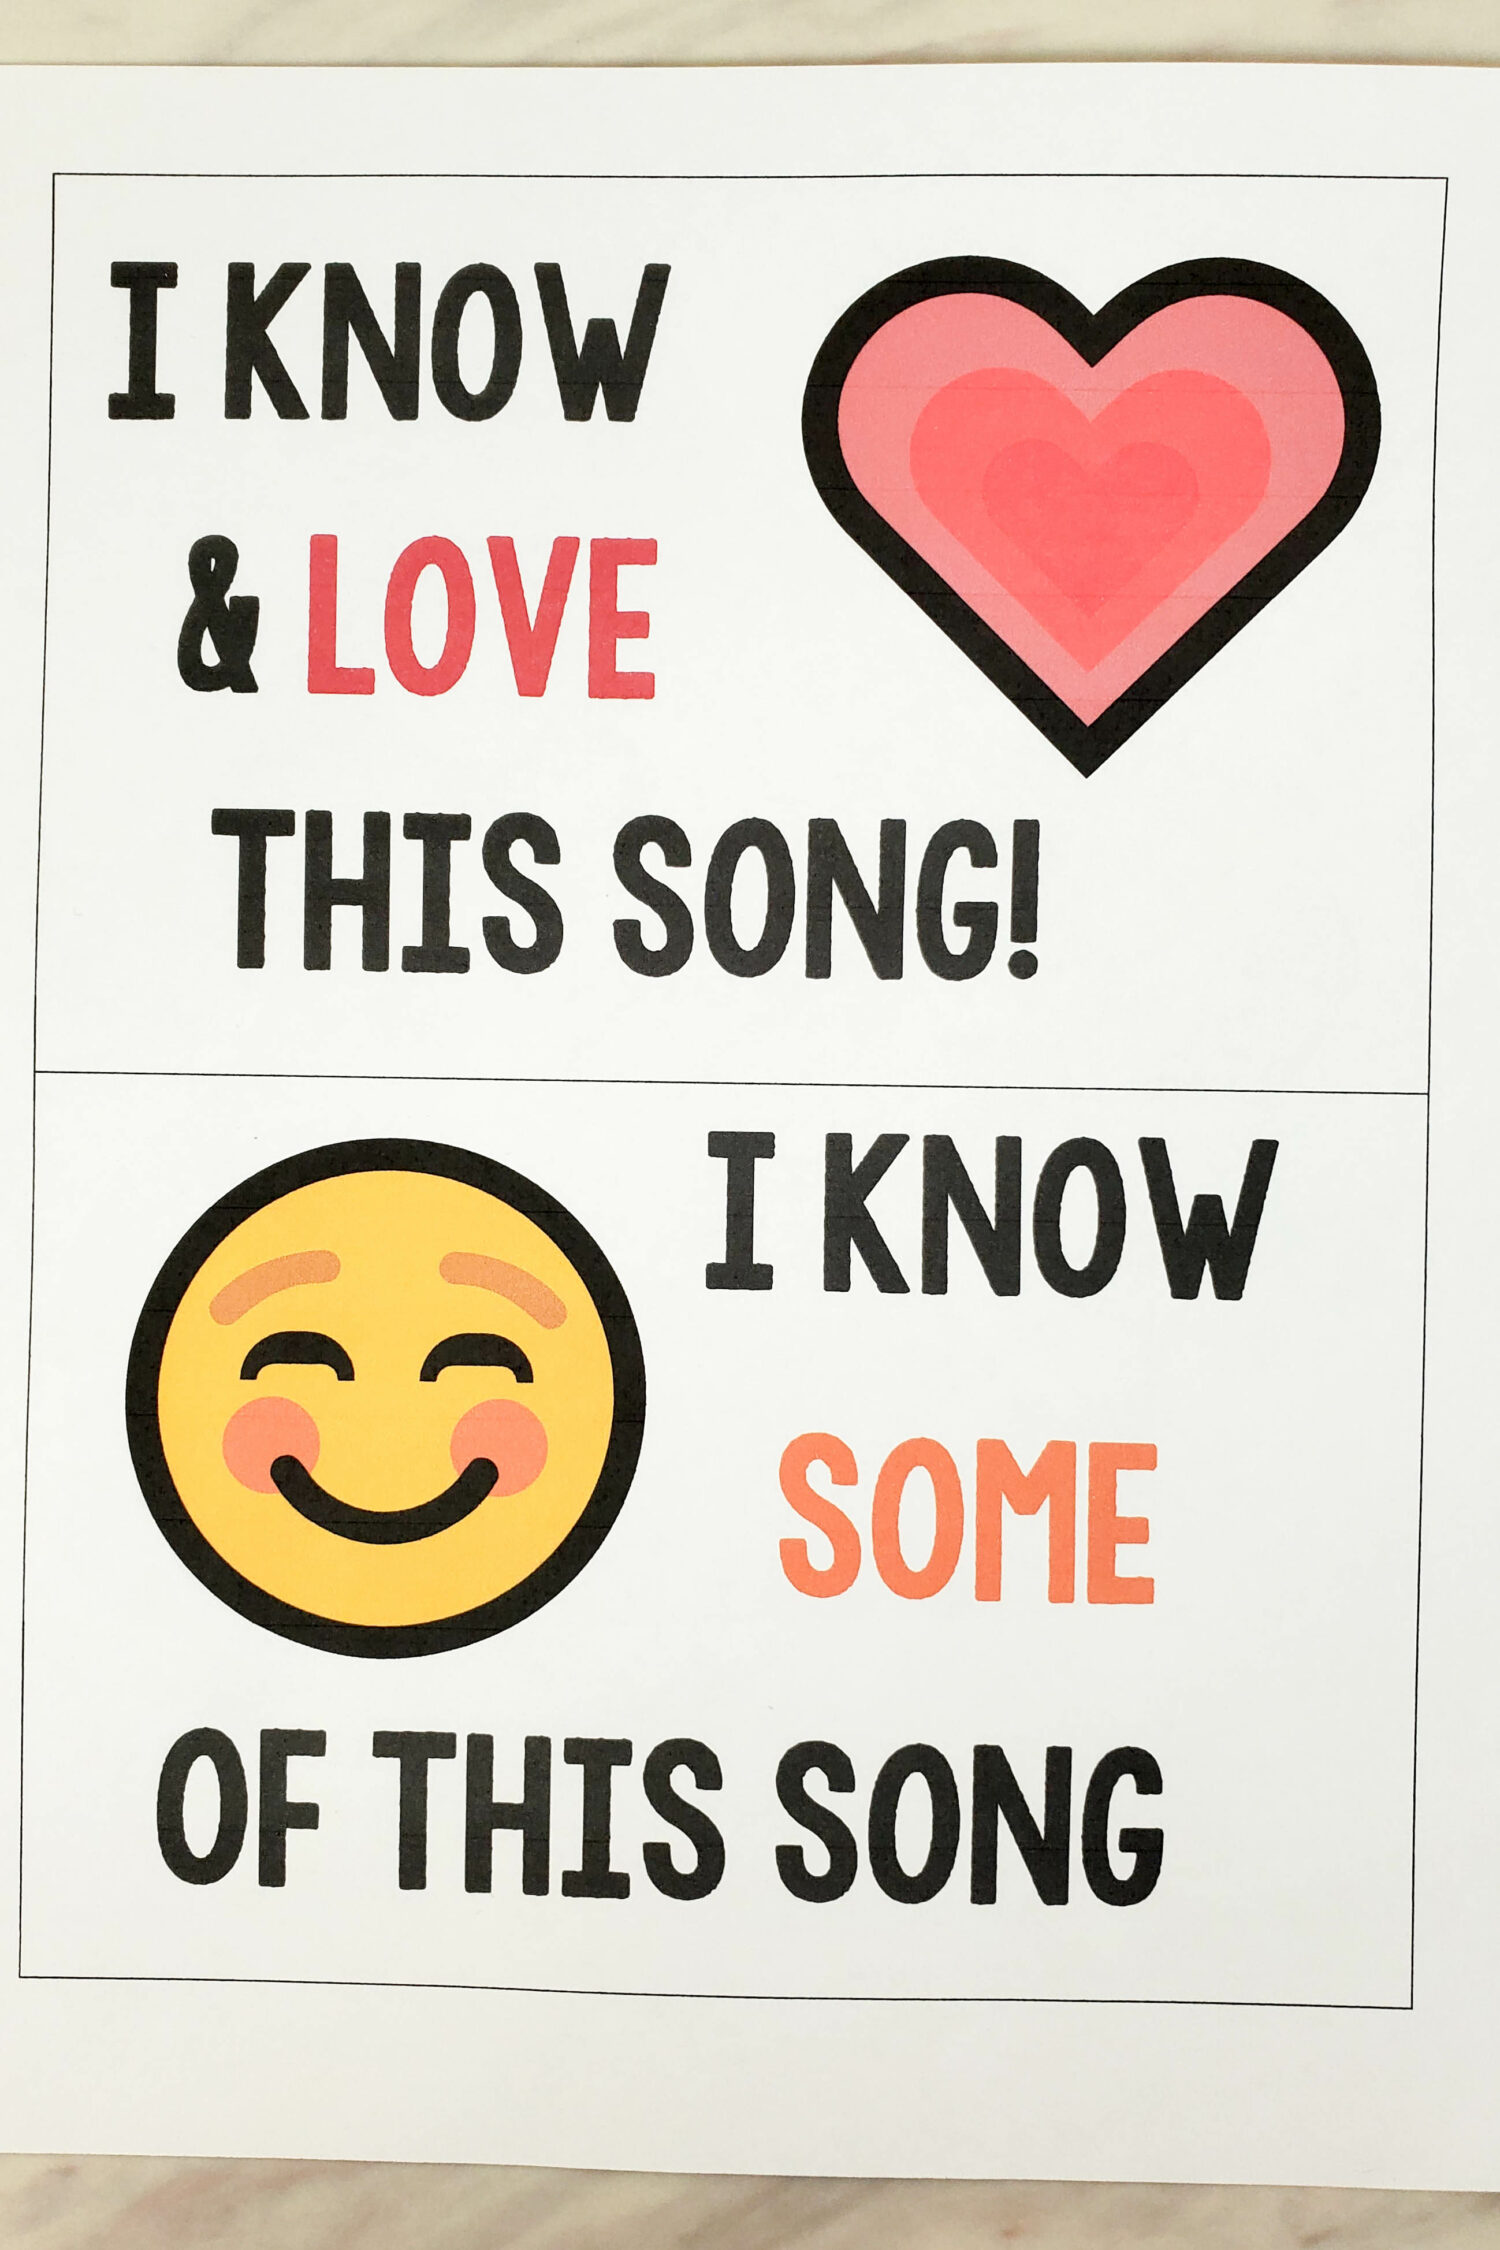 New Year Song Scramble fun singing time game and activity to help you introduce your songs for the year and see how well the kids know the songs already - with movement! Grab these no-prep signs for your walls and get to it with easy activities for LDS Primary music leaders.